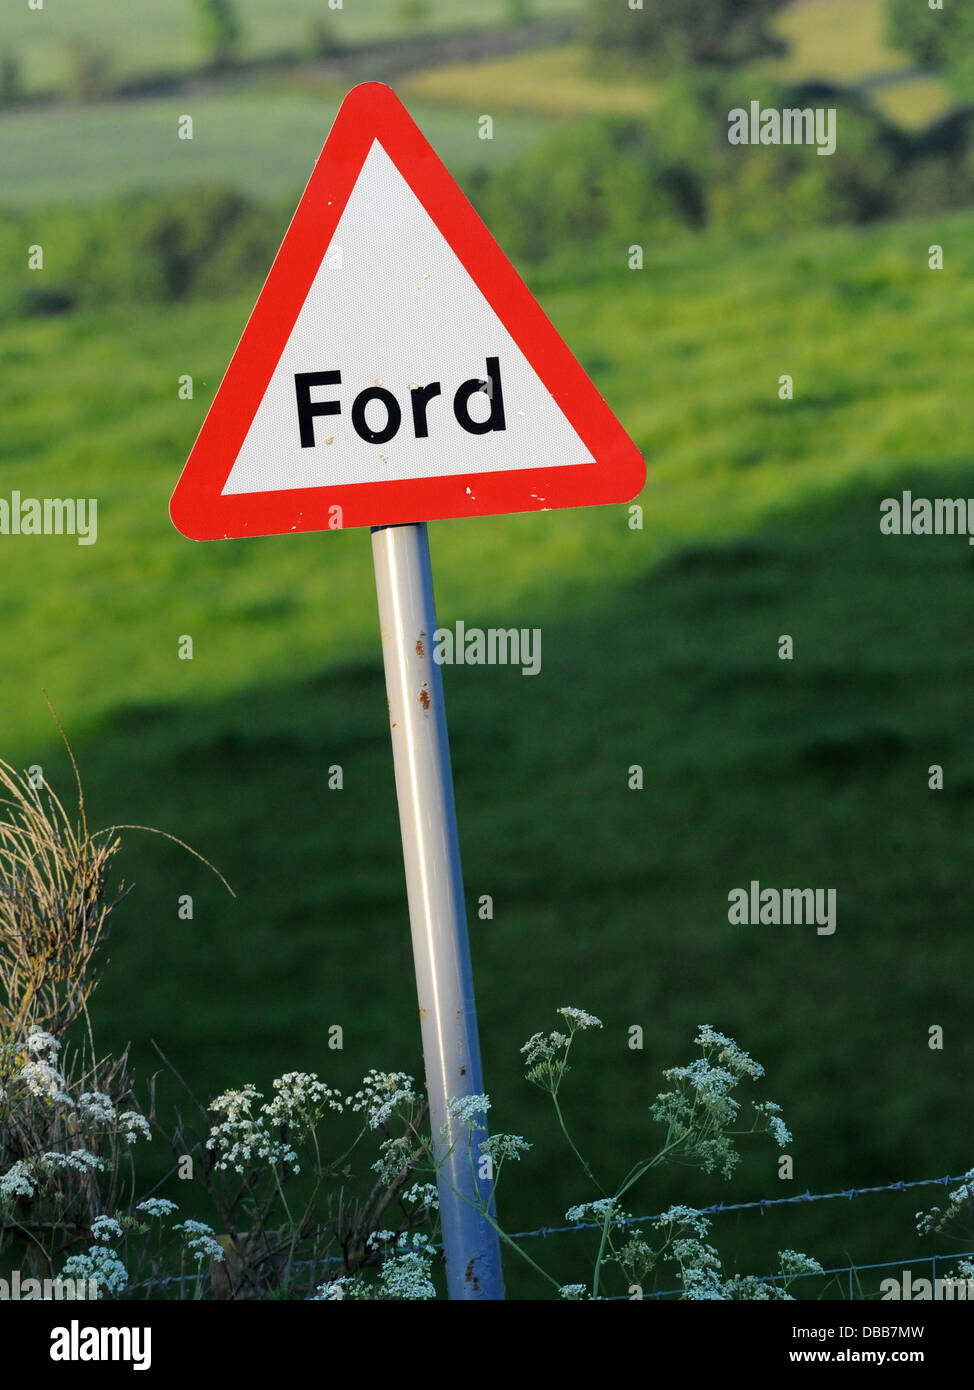 A road sign that says Ford. Stock Photo